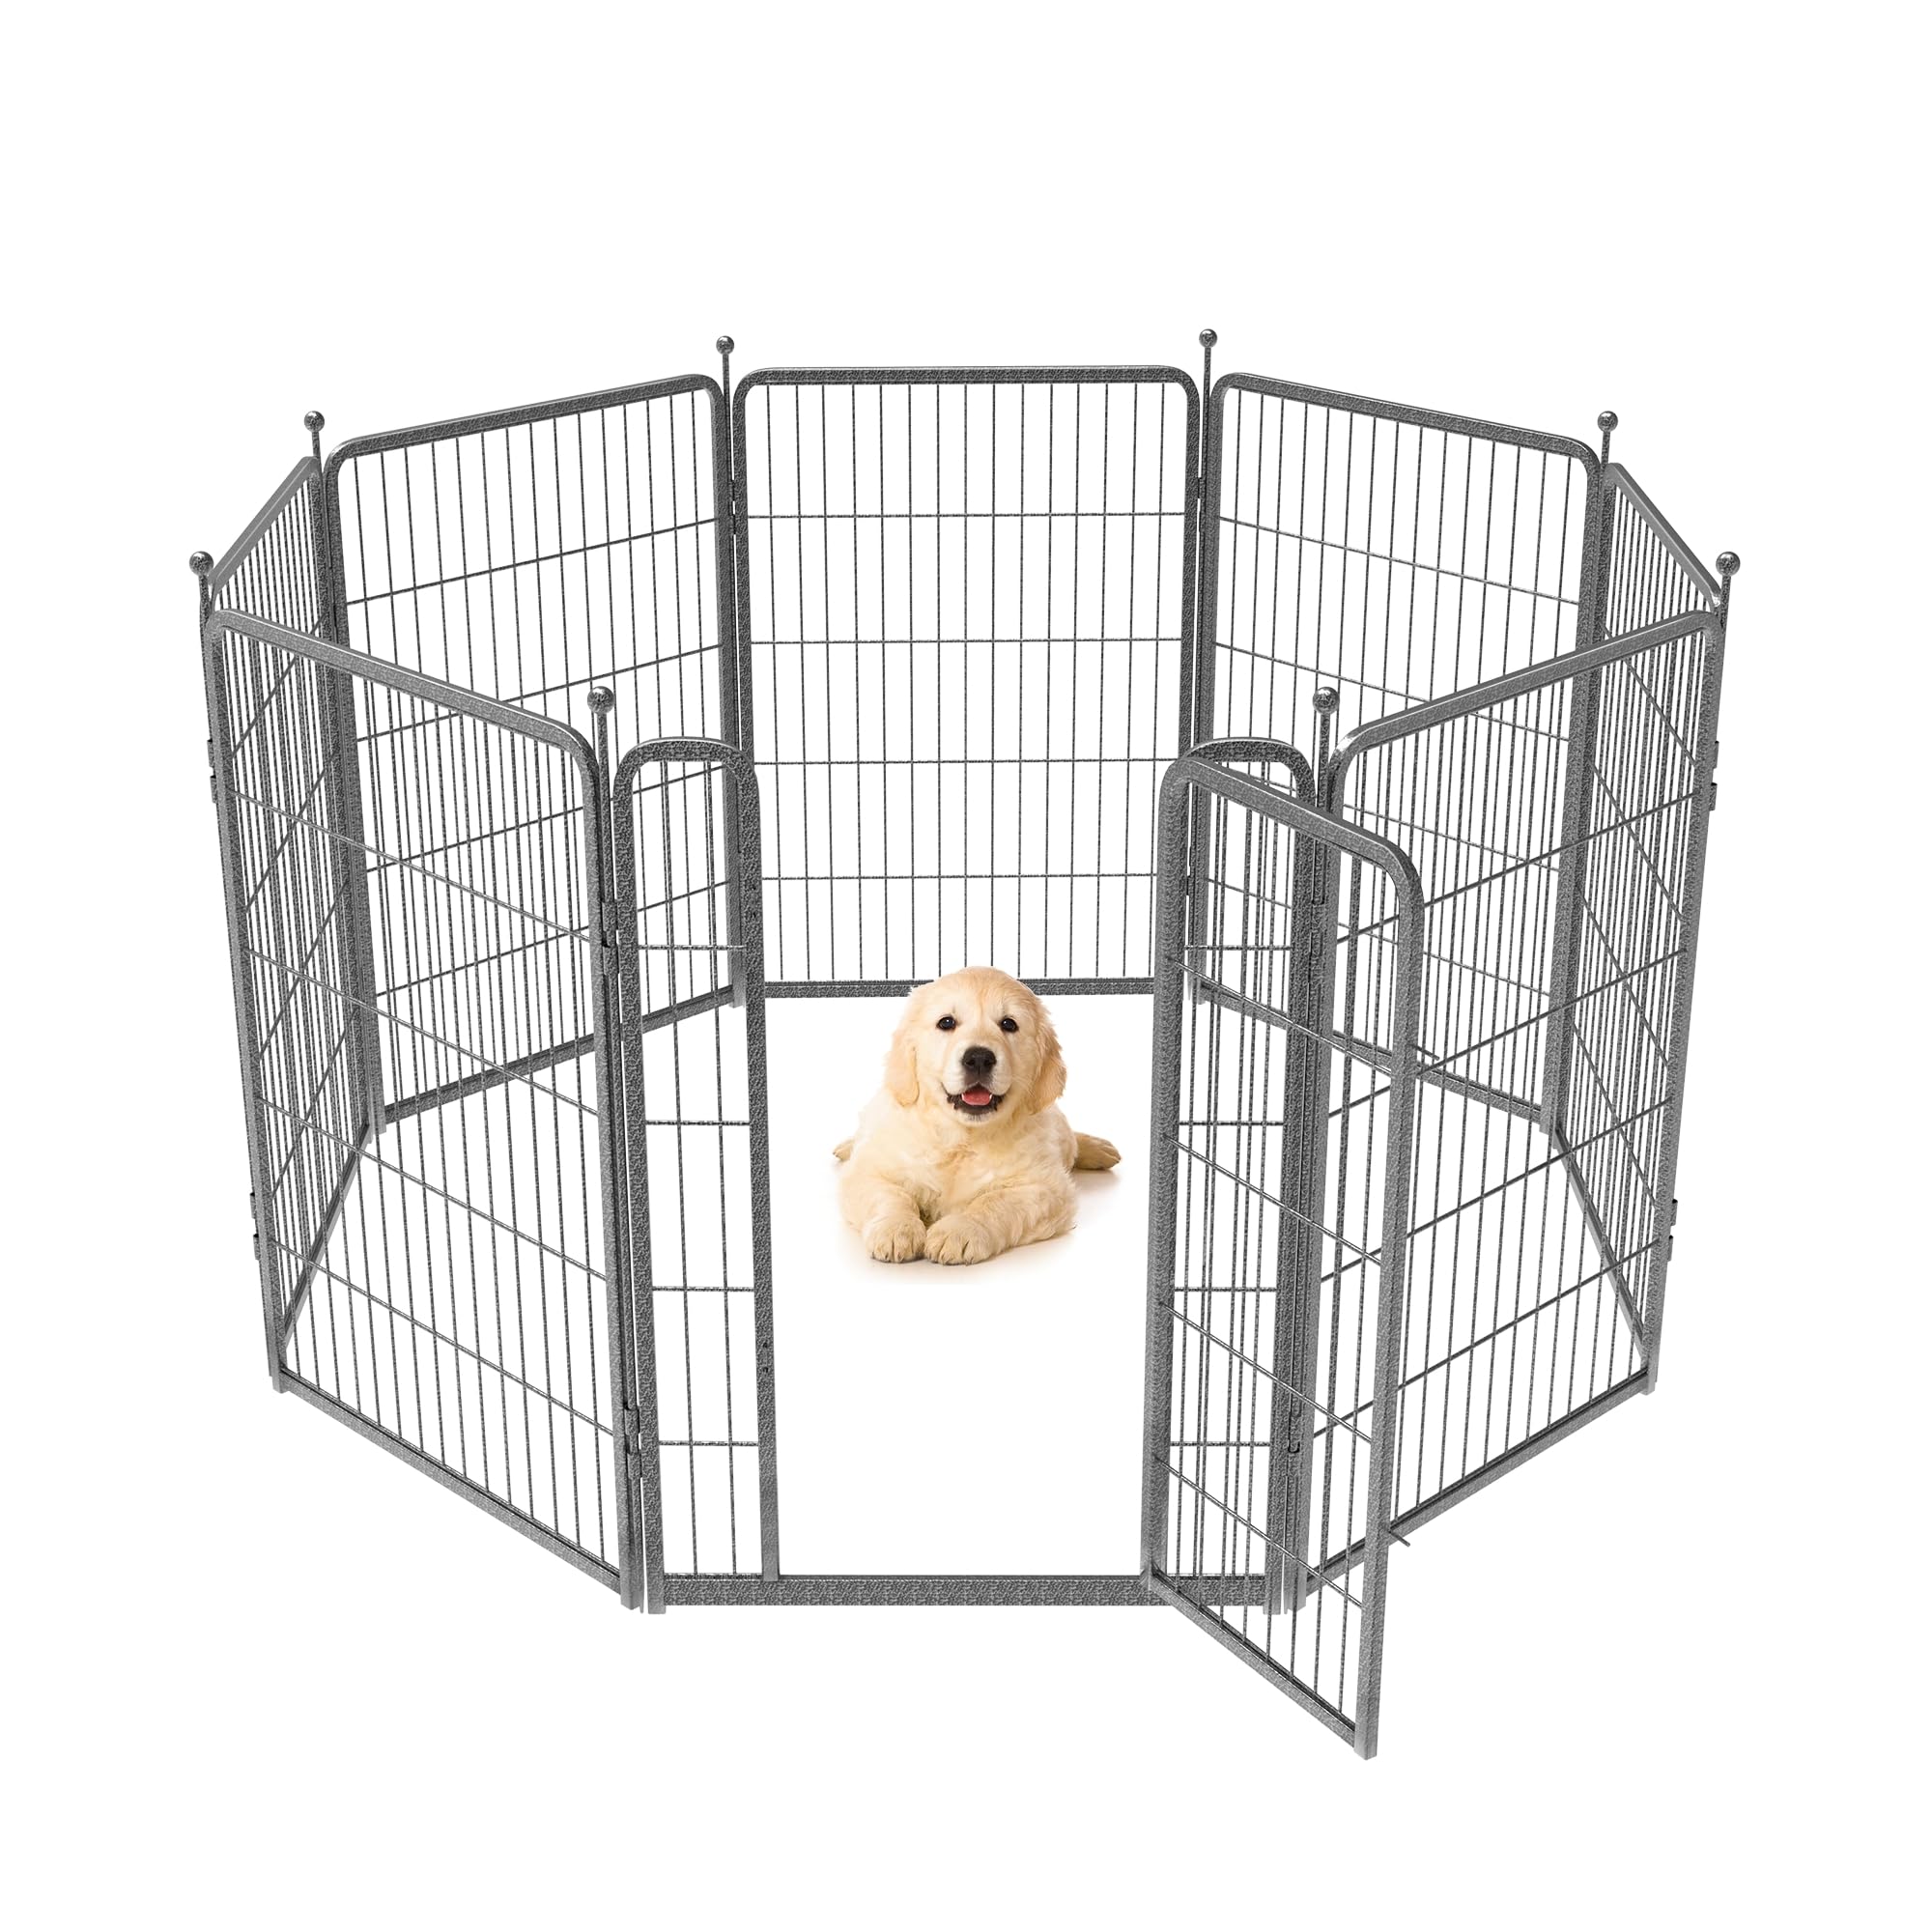 FXW Aster Dog Playpen Outdoor,8/16 Panels Dog Fences for The Yard,24"/32"/40" Height Metal Dog Pens Outdoor Pet Fence with Doors